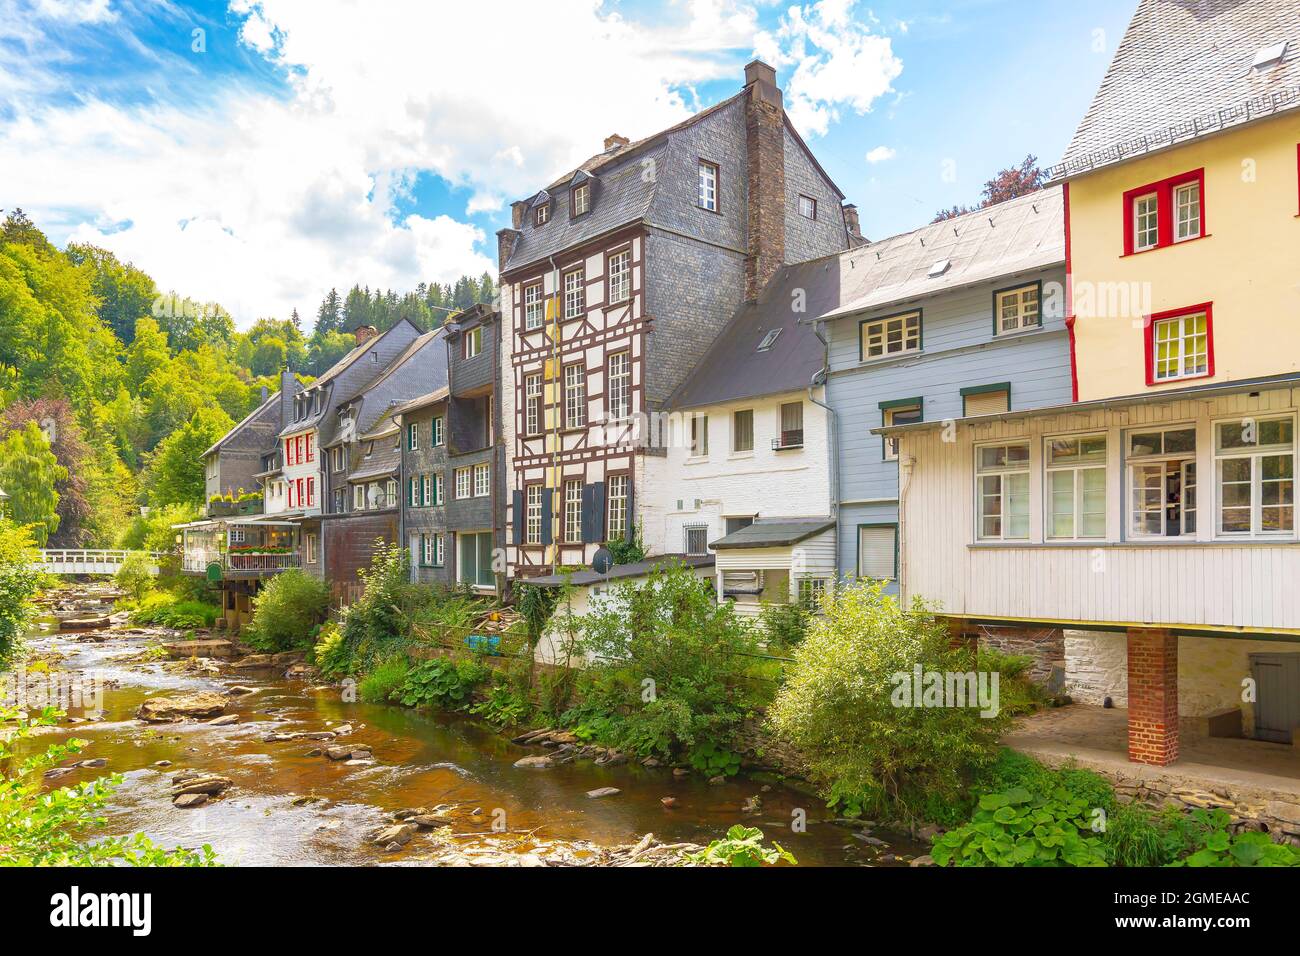 Best of the touristic village Monschau, located in the hills of the North Eifel, within the Hohes Venn – Eifel Nature Park in the narrow valley of the Stock Photo